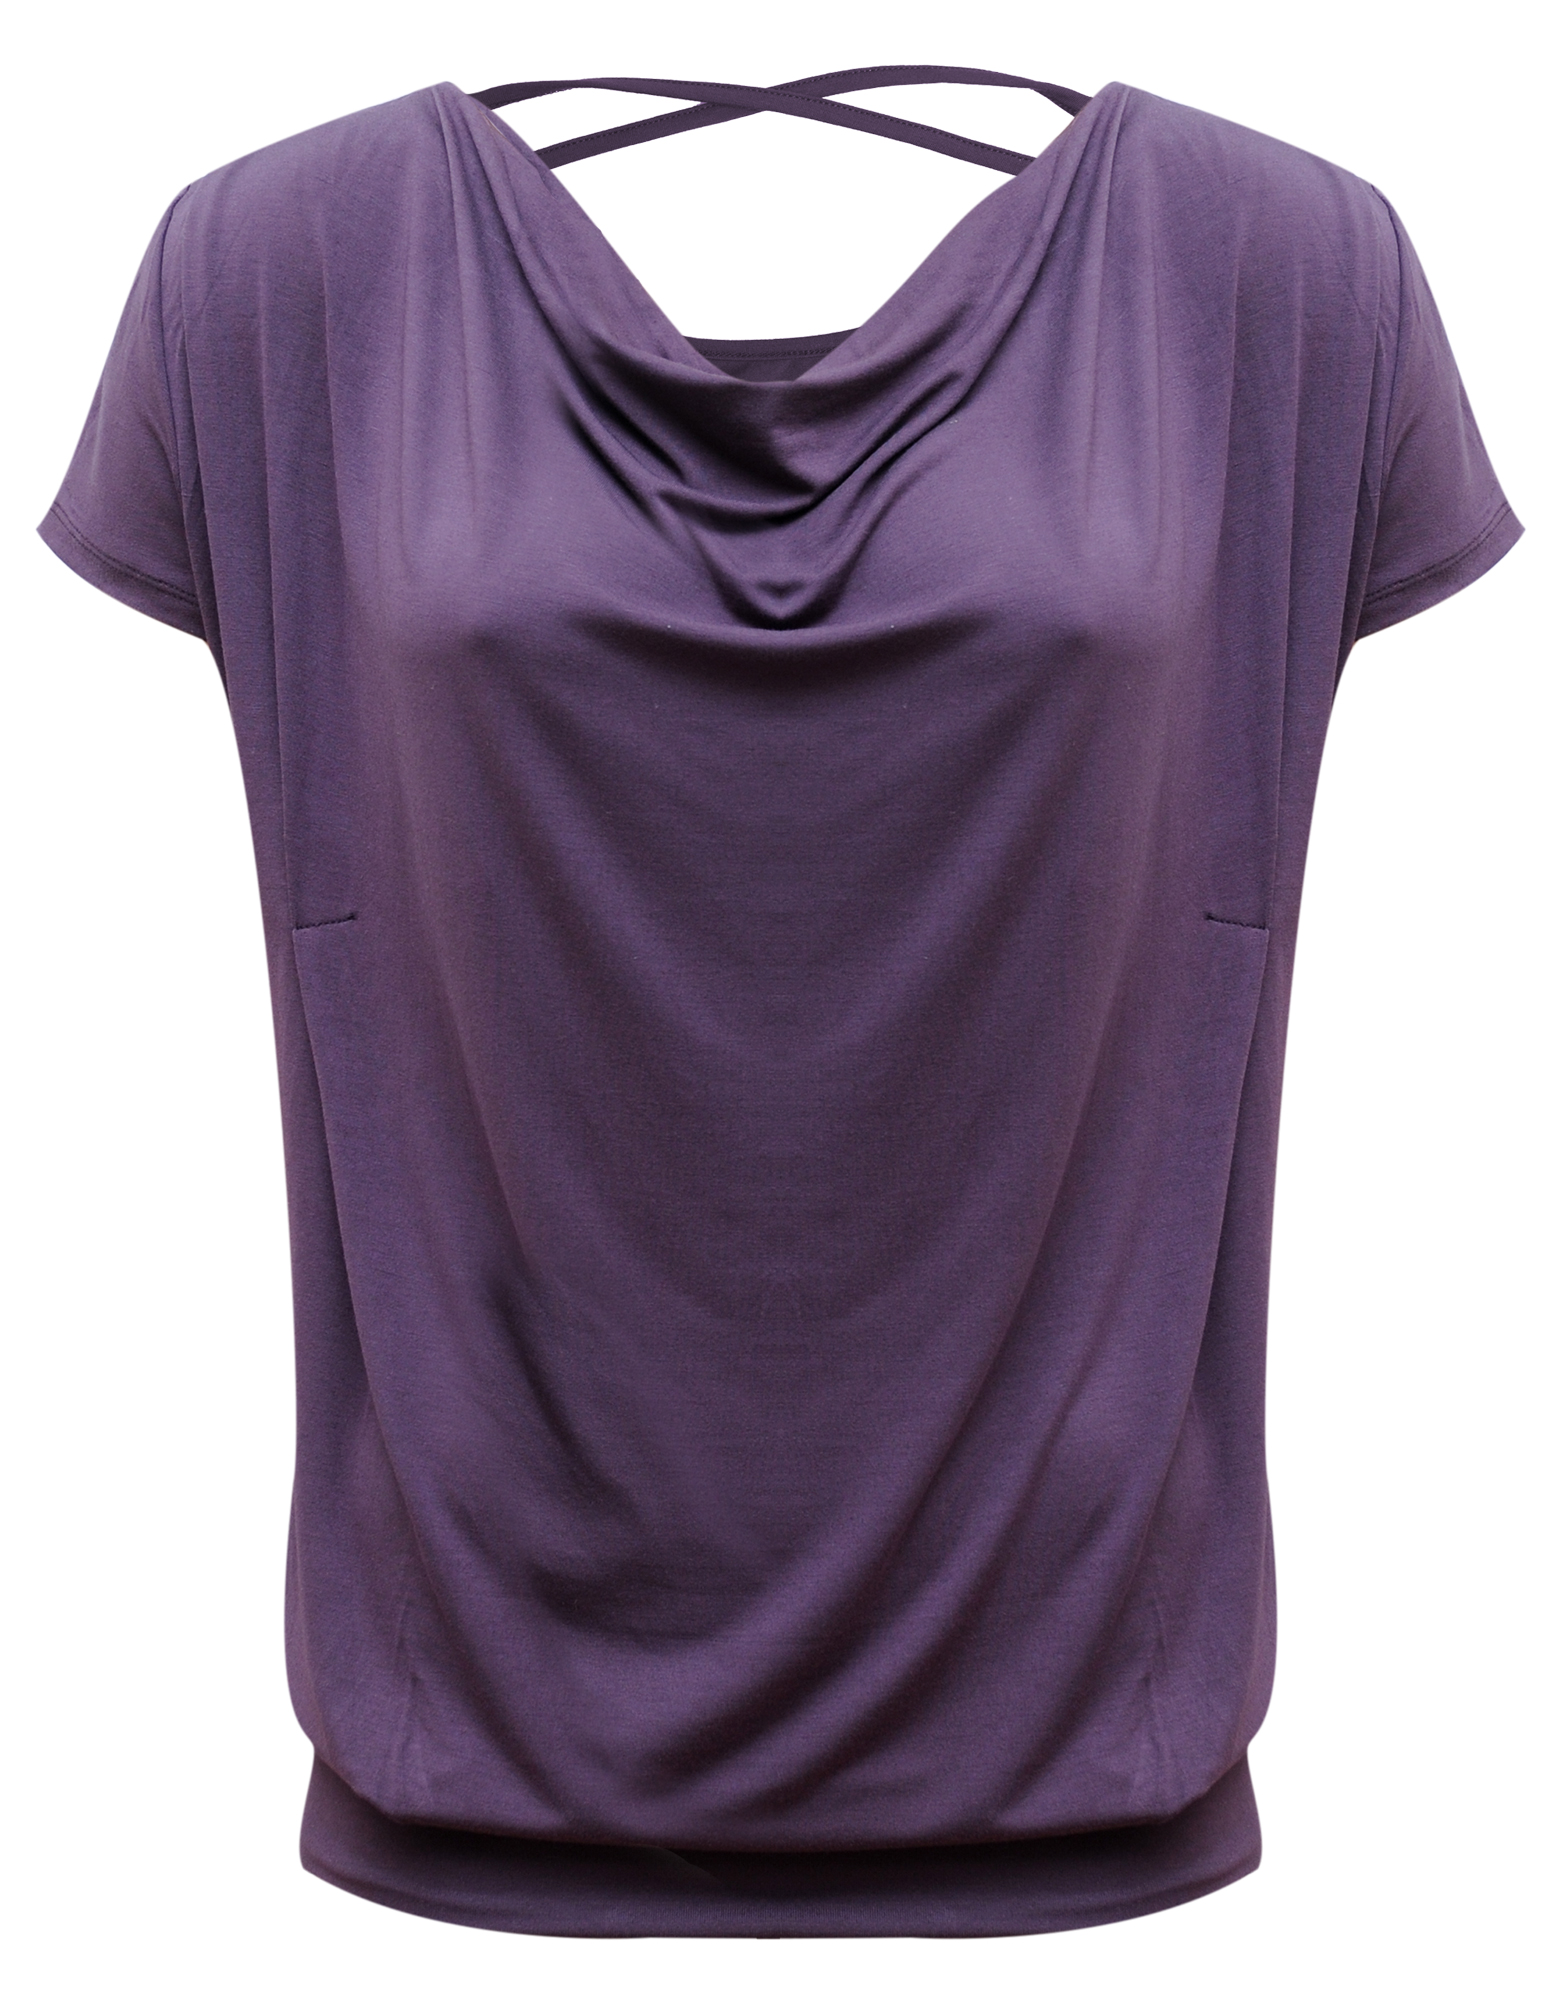 https://www.yogistar.com/out/pictures/master/product/1/yoga_shirt_flowing_batwing_ala_elderberry_web2000.jpg